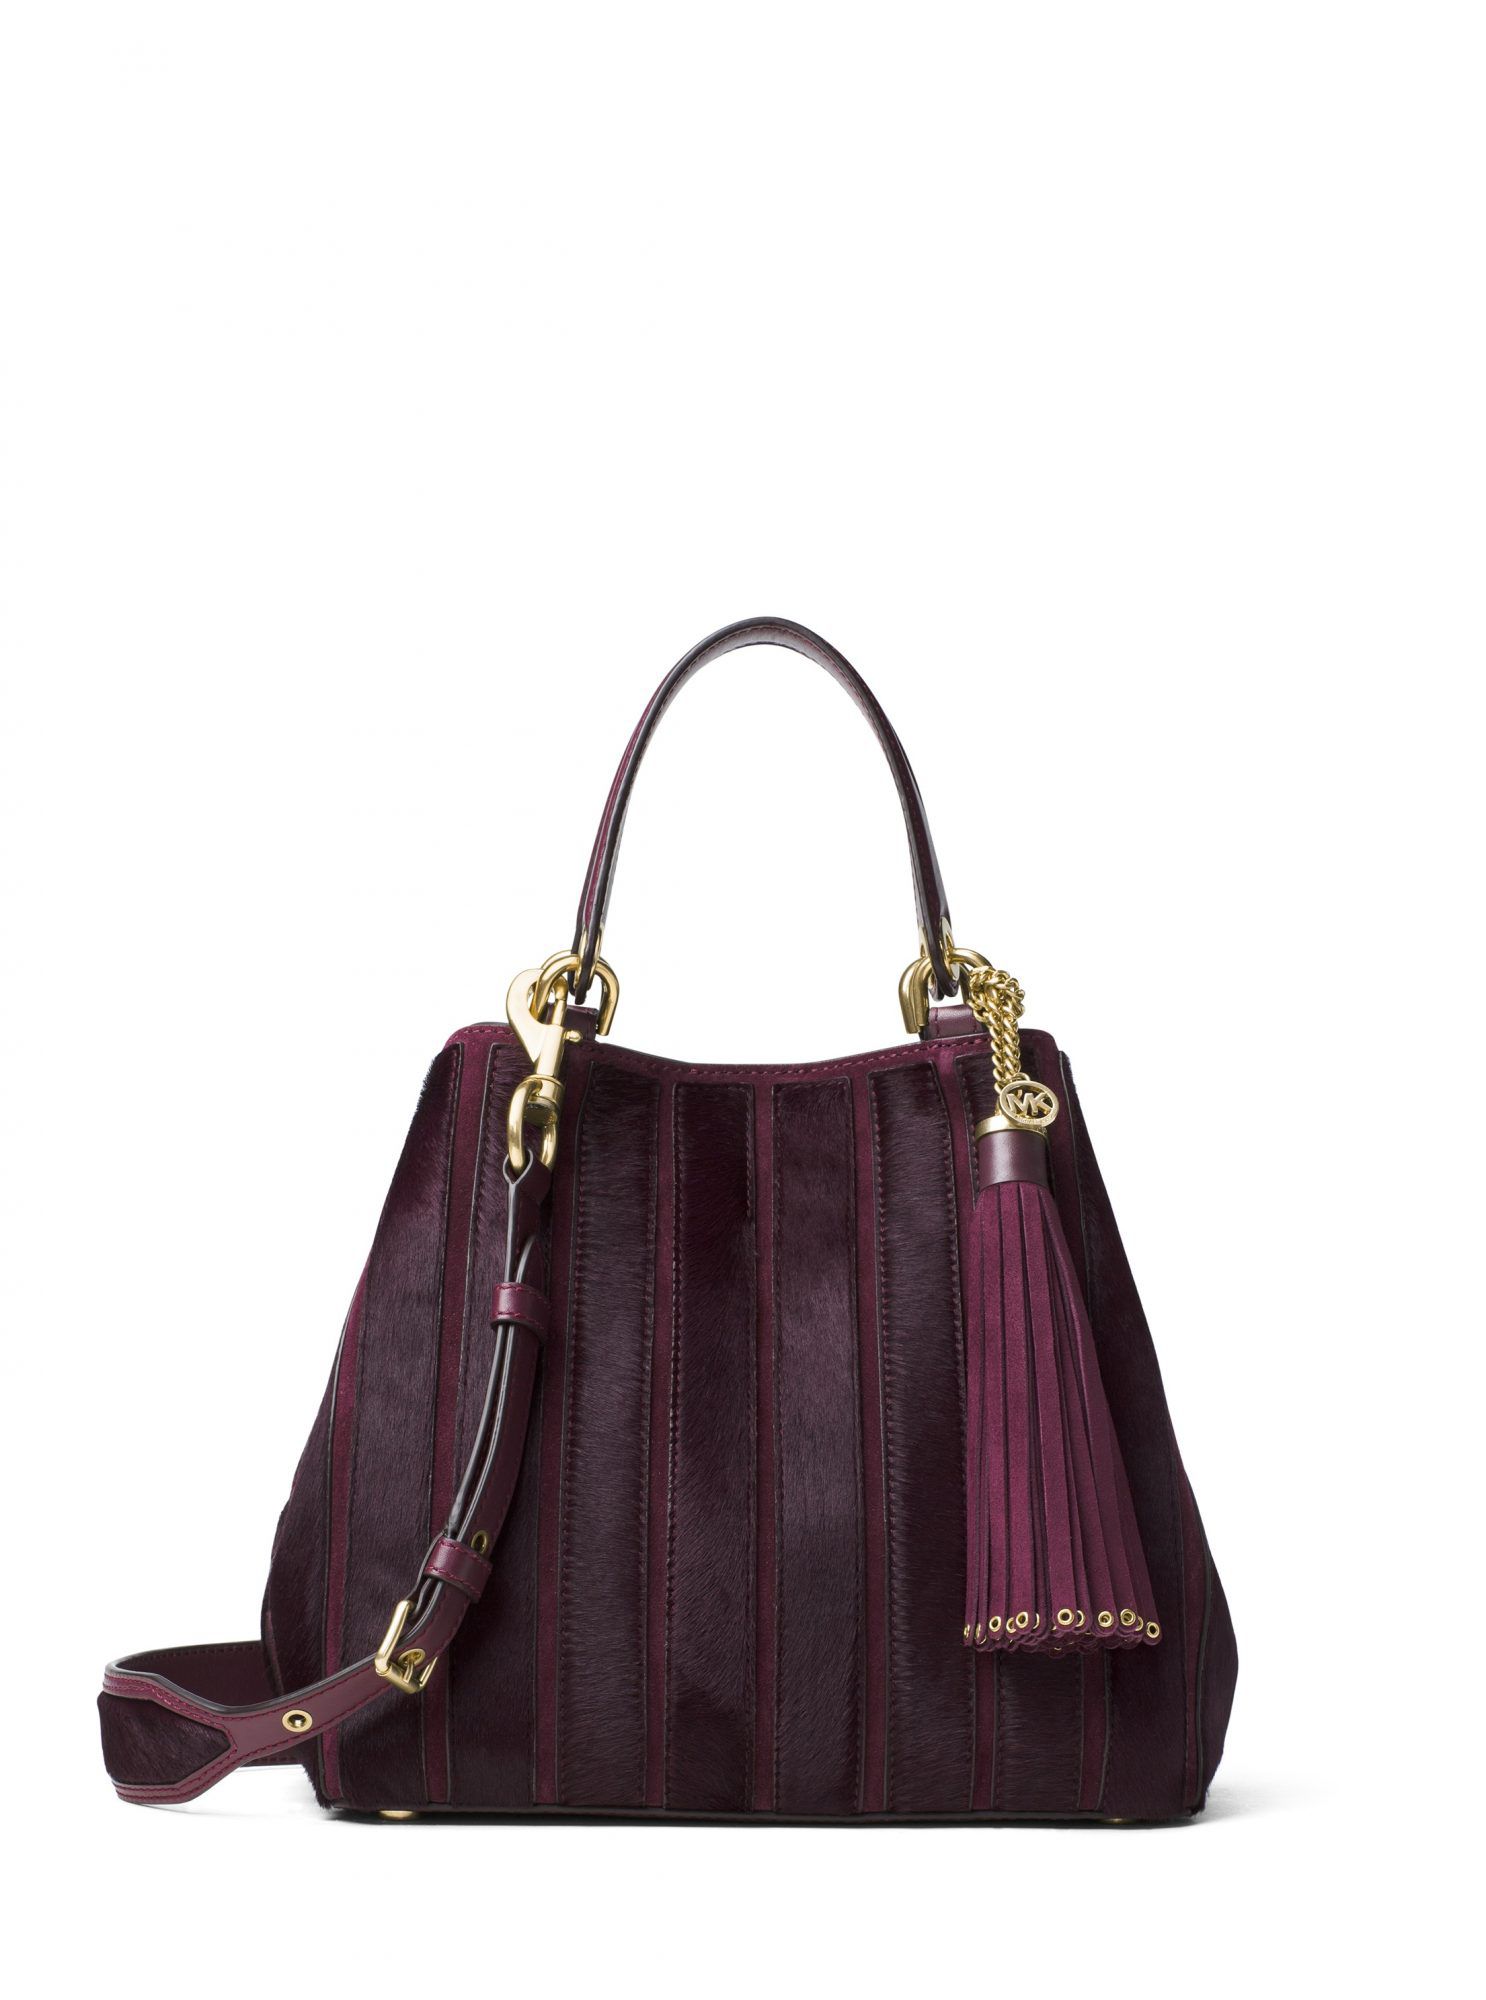 SUEDE AND HAIRCALF SHOULDER BAG